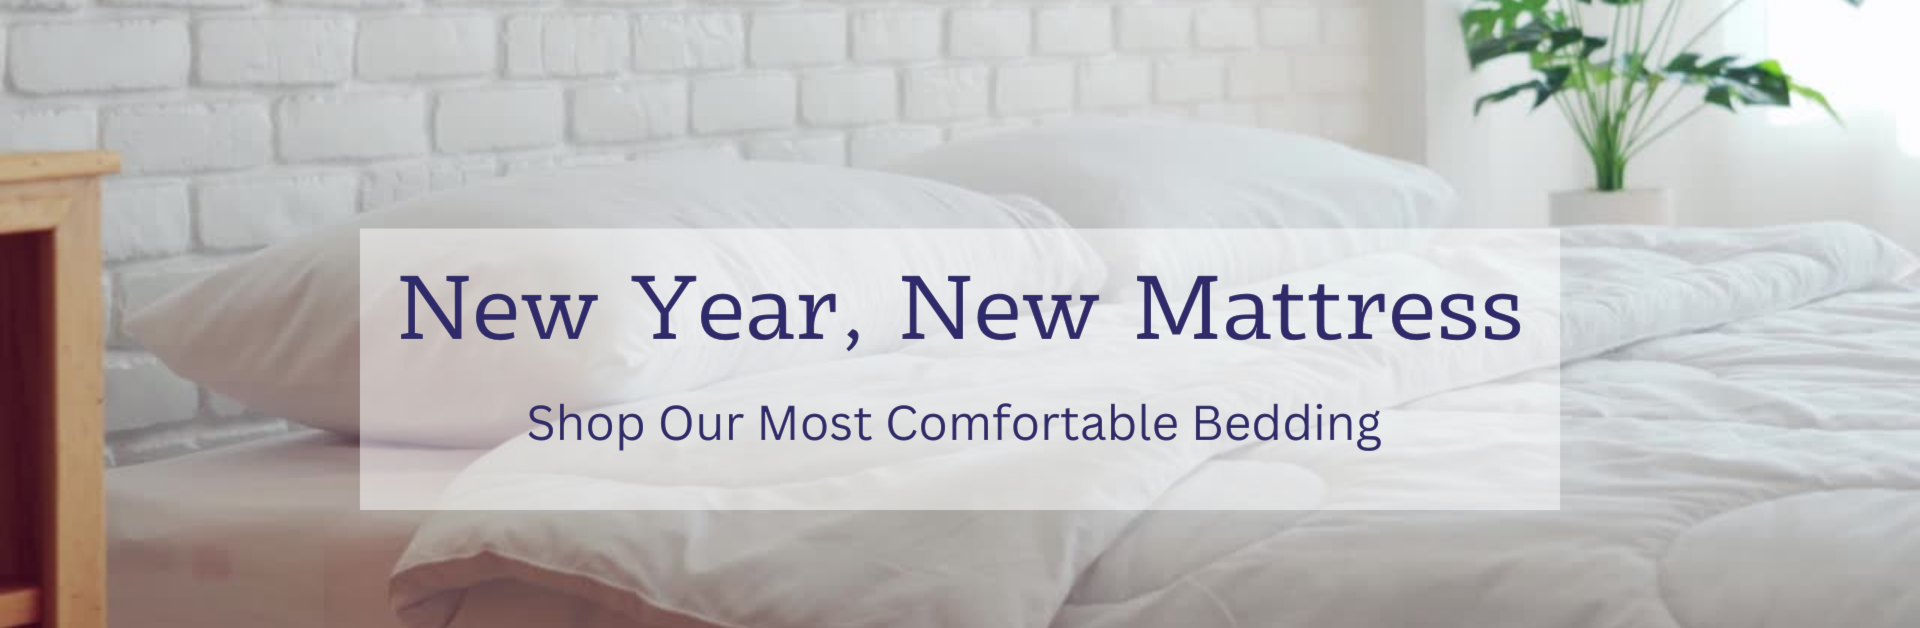 new year, new mattress. shop our most comfortable bedding.